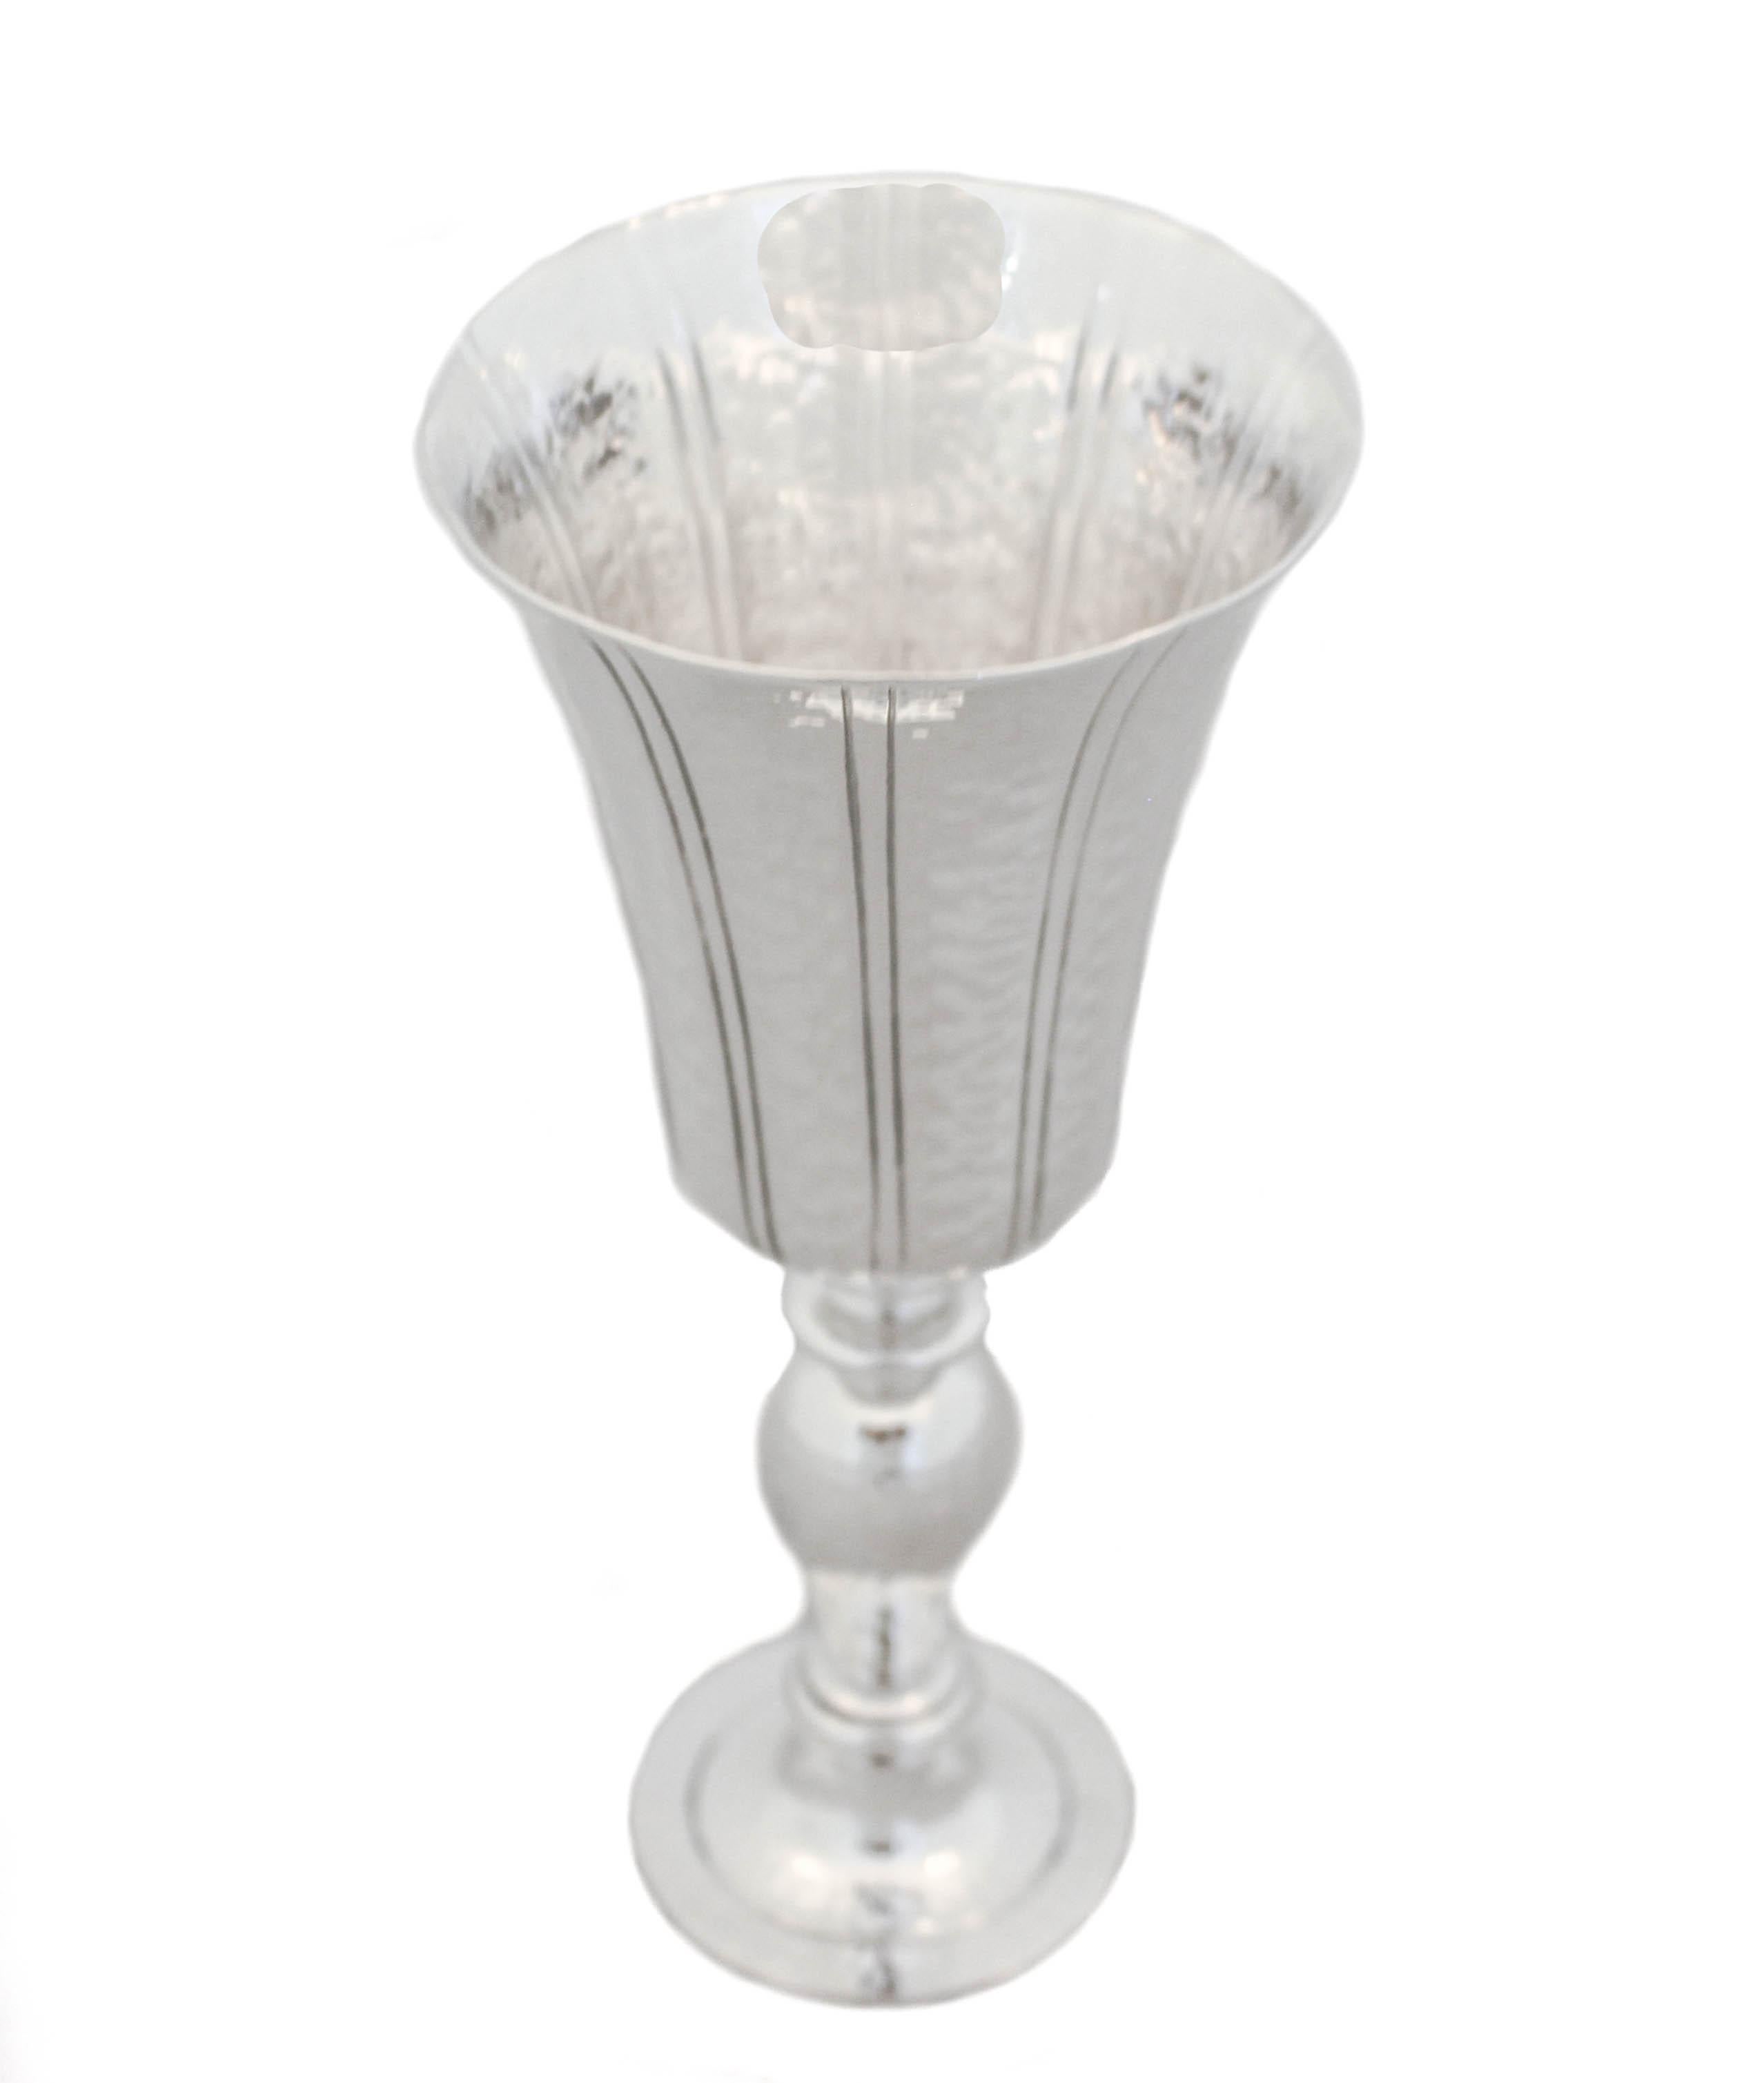 We are thrilled to offer you this sterling silver goblet by Pampaloni. It is hand-hammered and has a beautiful shape. The top of the cup curves outward giving it a regal presence. A very special piece that will look gorgeous in any decor.